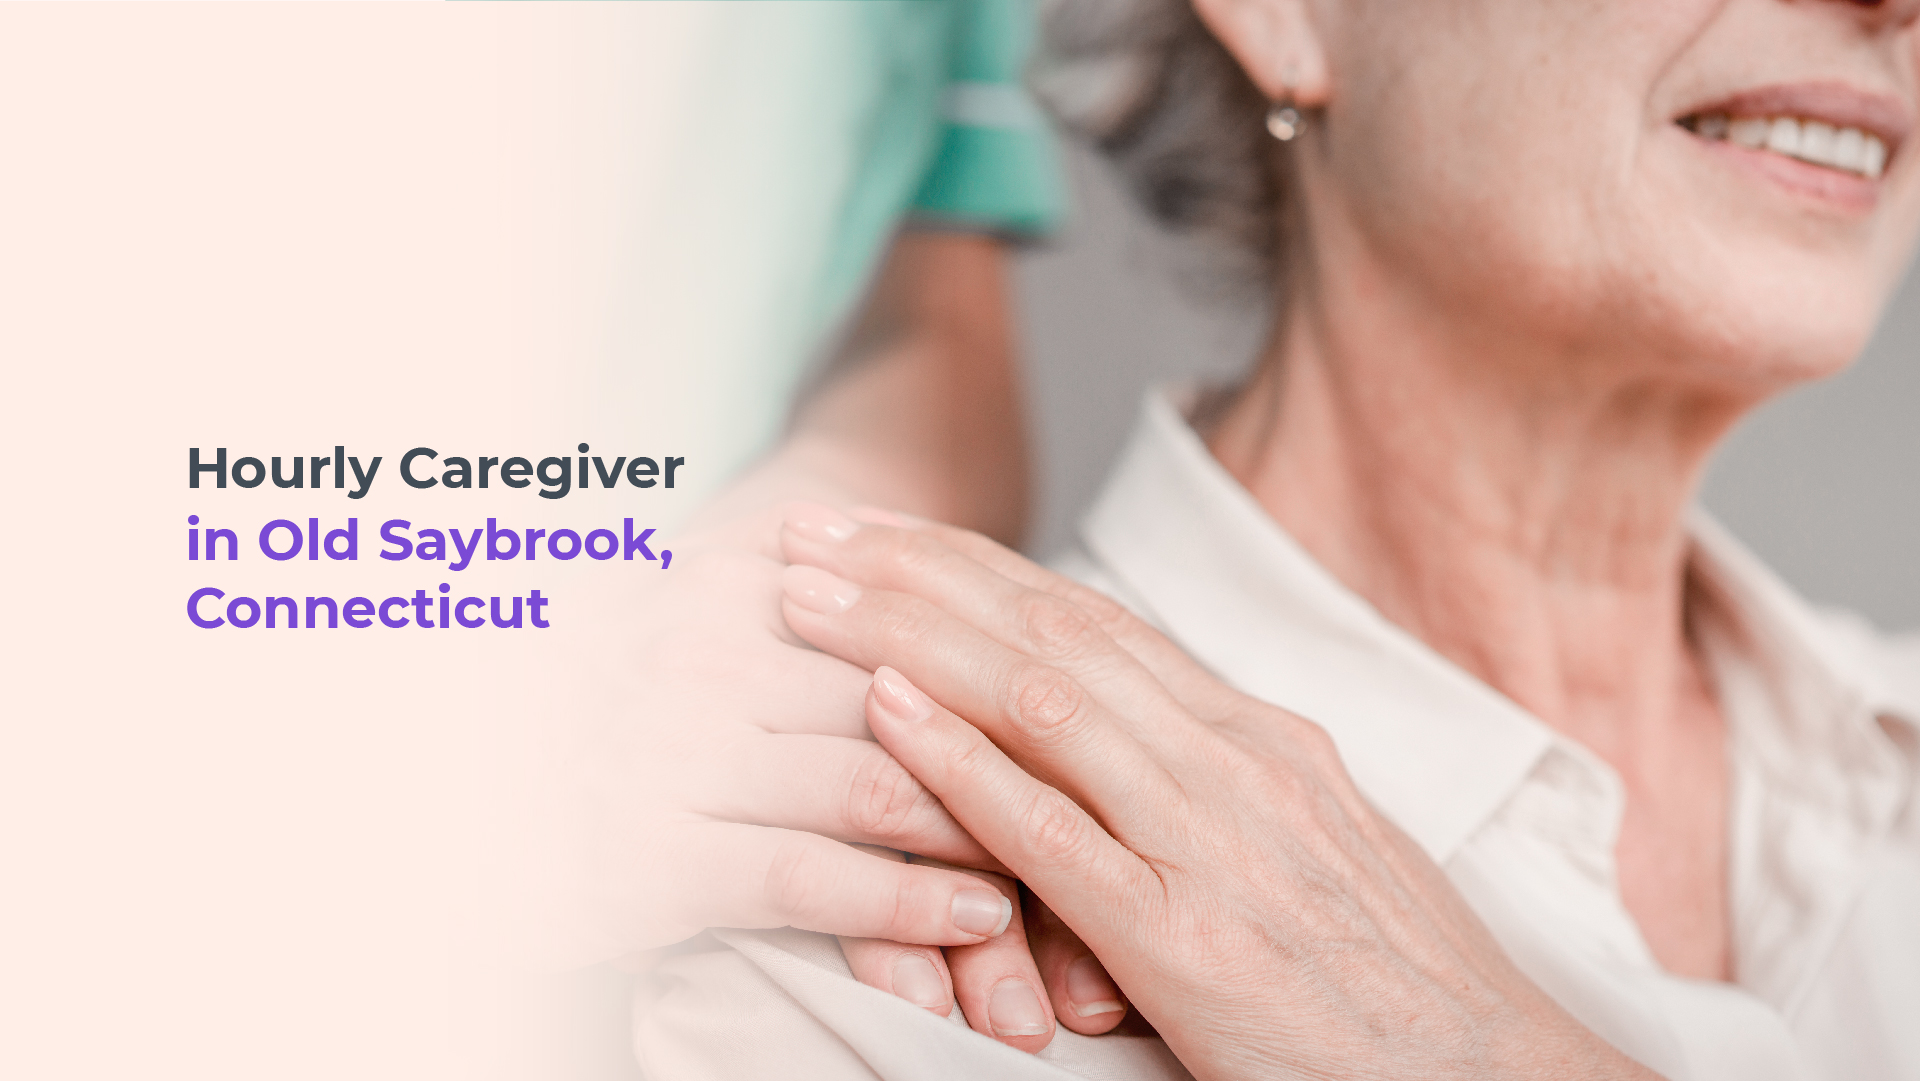 Hourly Caregivers in Old Saybrook Connecticut